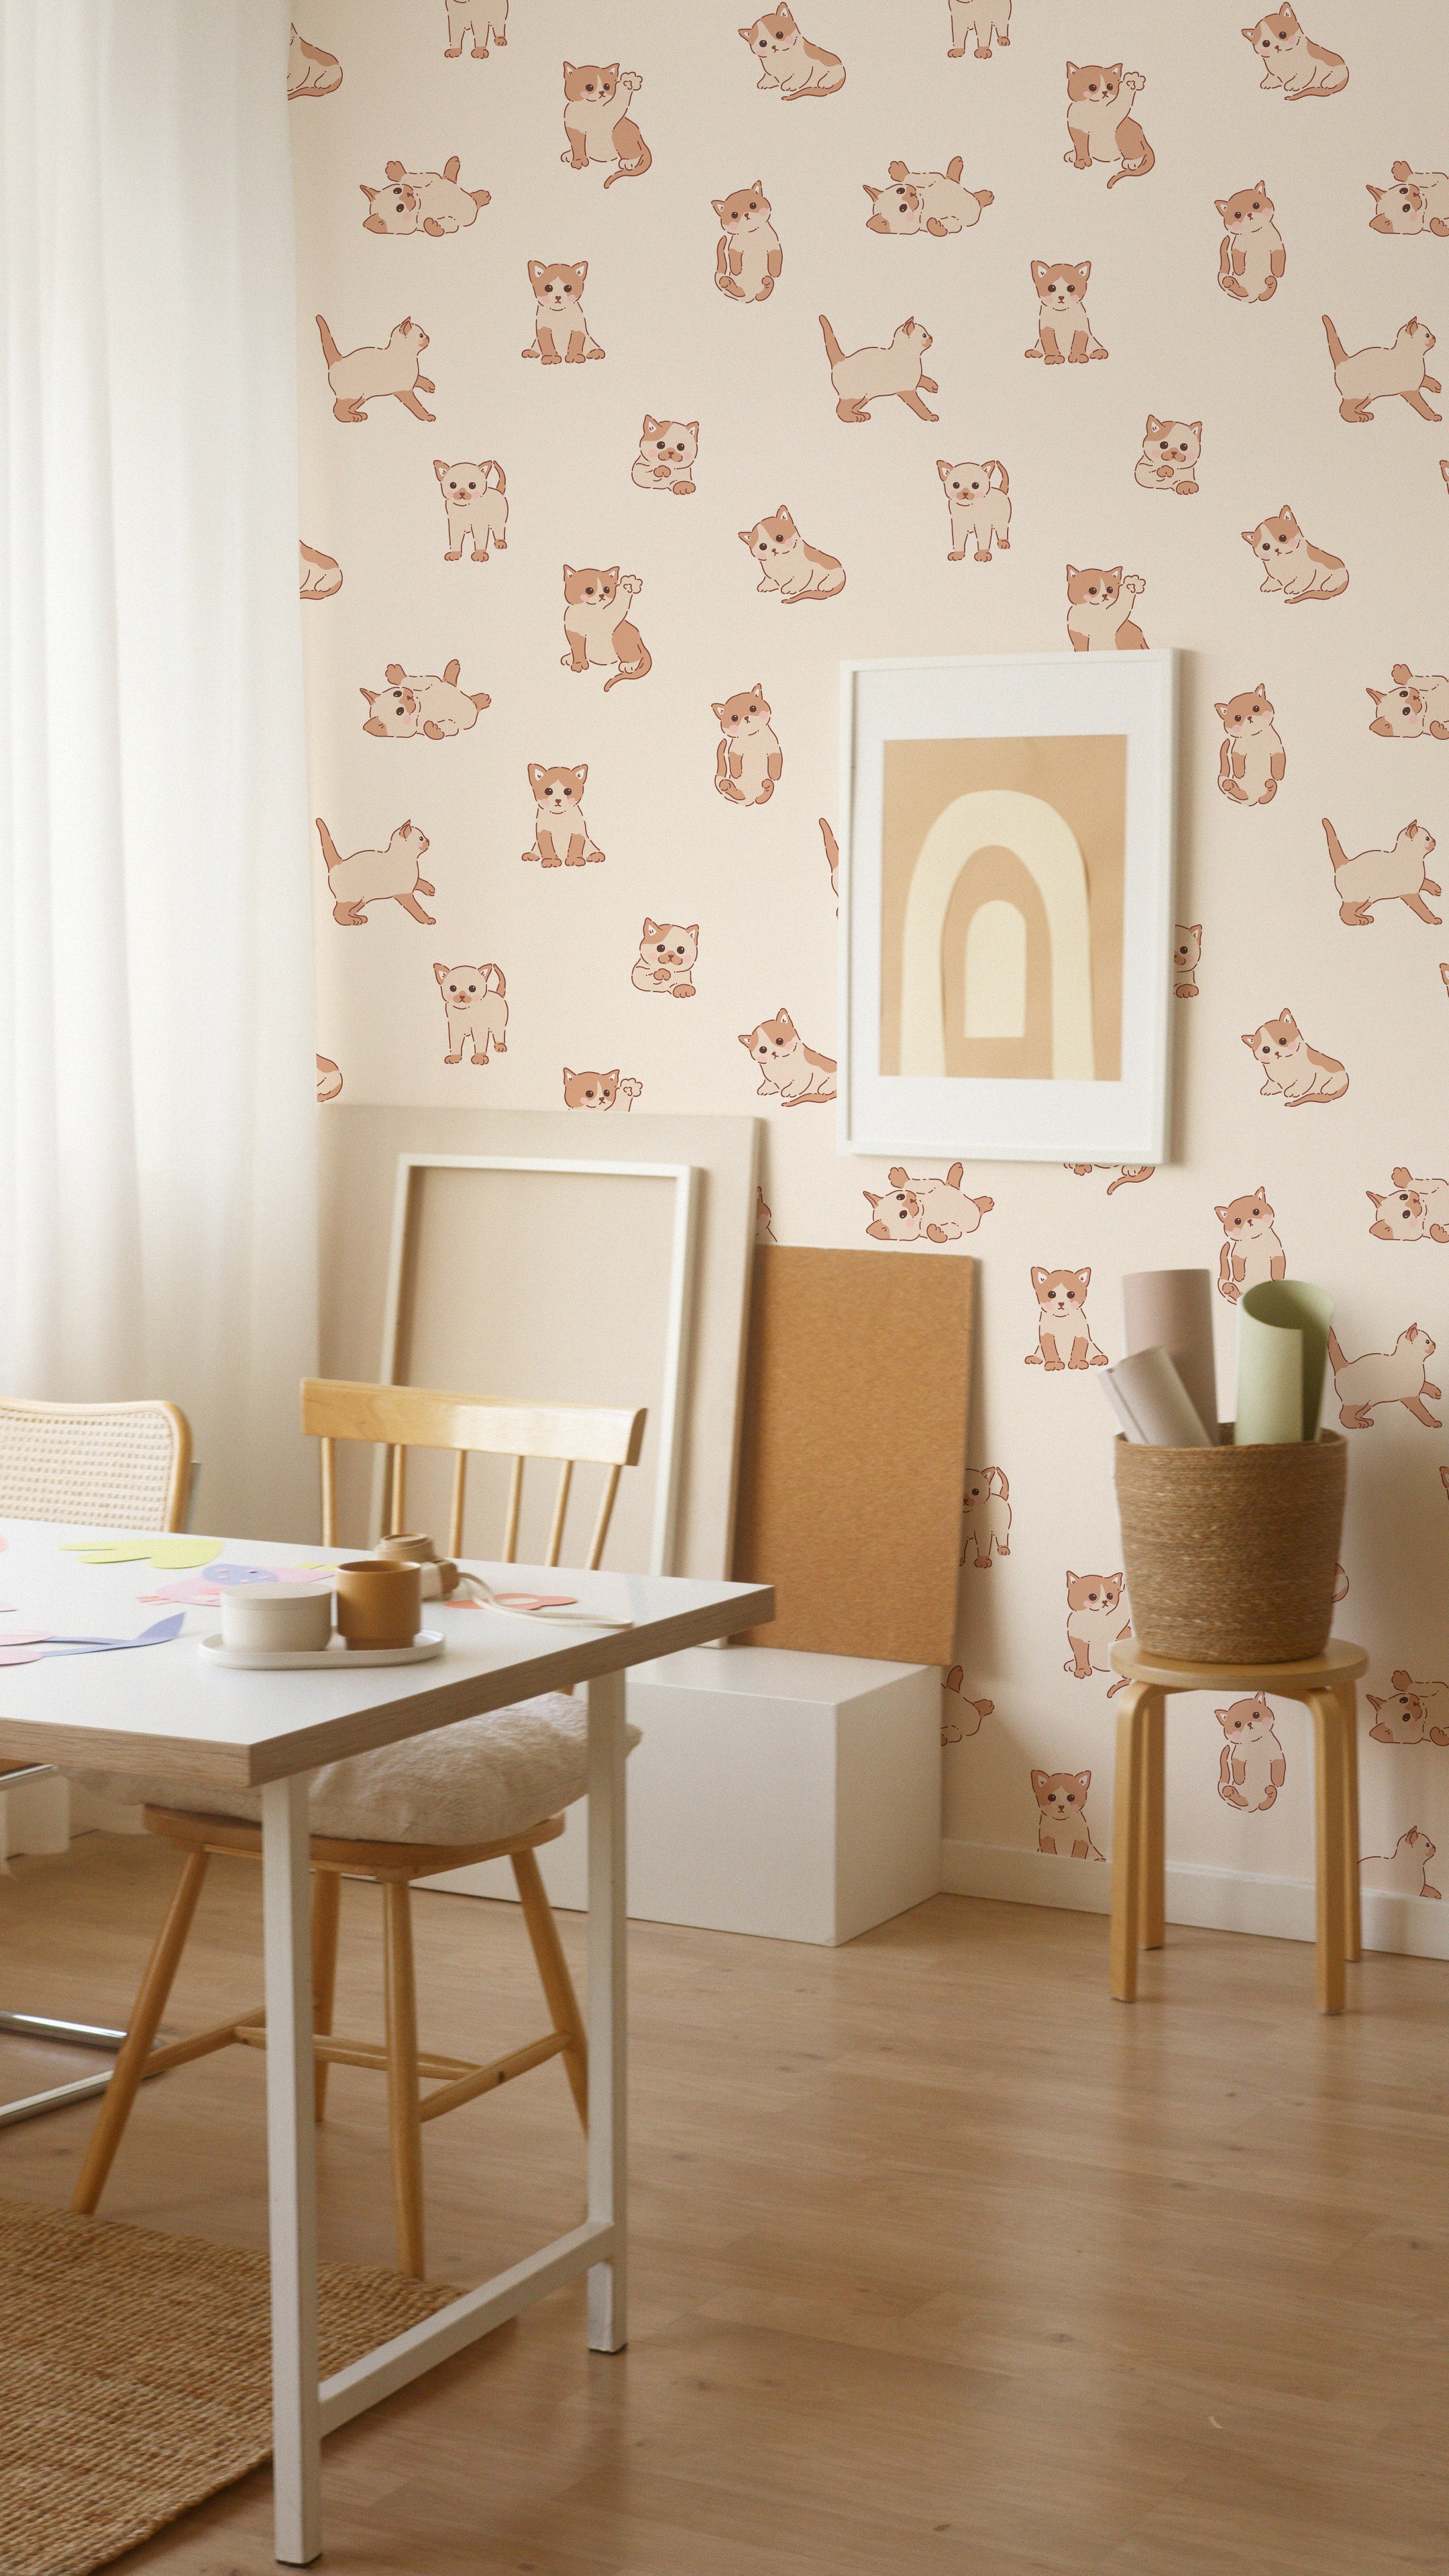 A creative workspace enhanced with Chaton Wallpaper displaying playful kitten illustrations in beige and brown on a peach backdrop. The room features a minimalist white desk, a light wooden chair, and various art supplies, creating an inspiring environment for creativity.